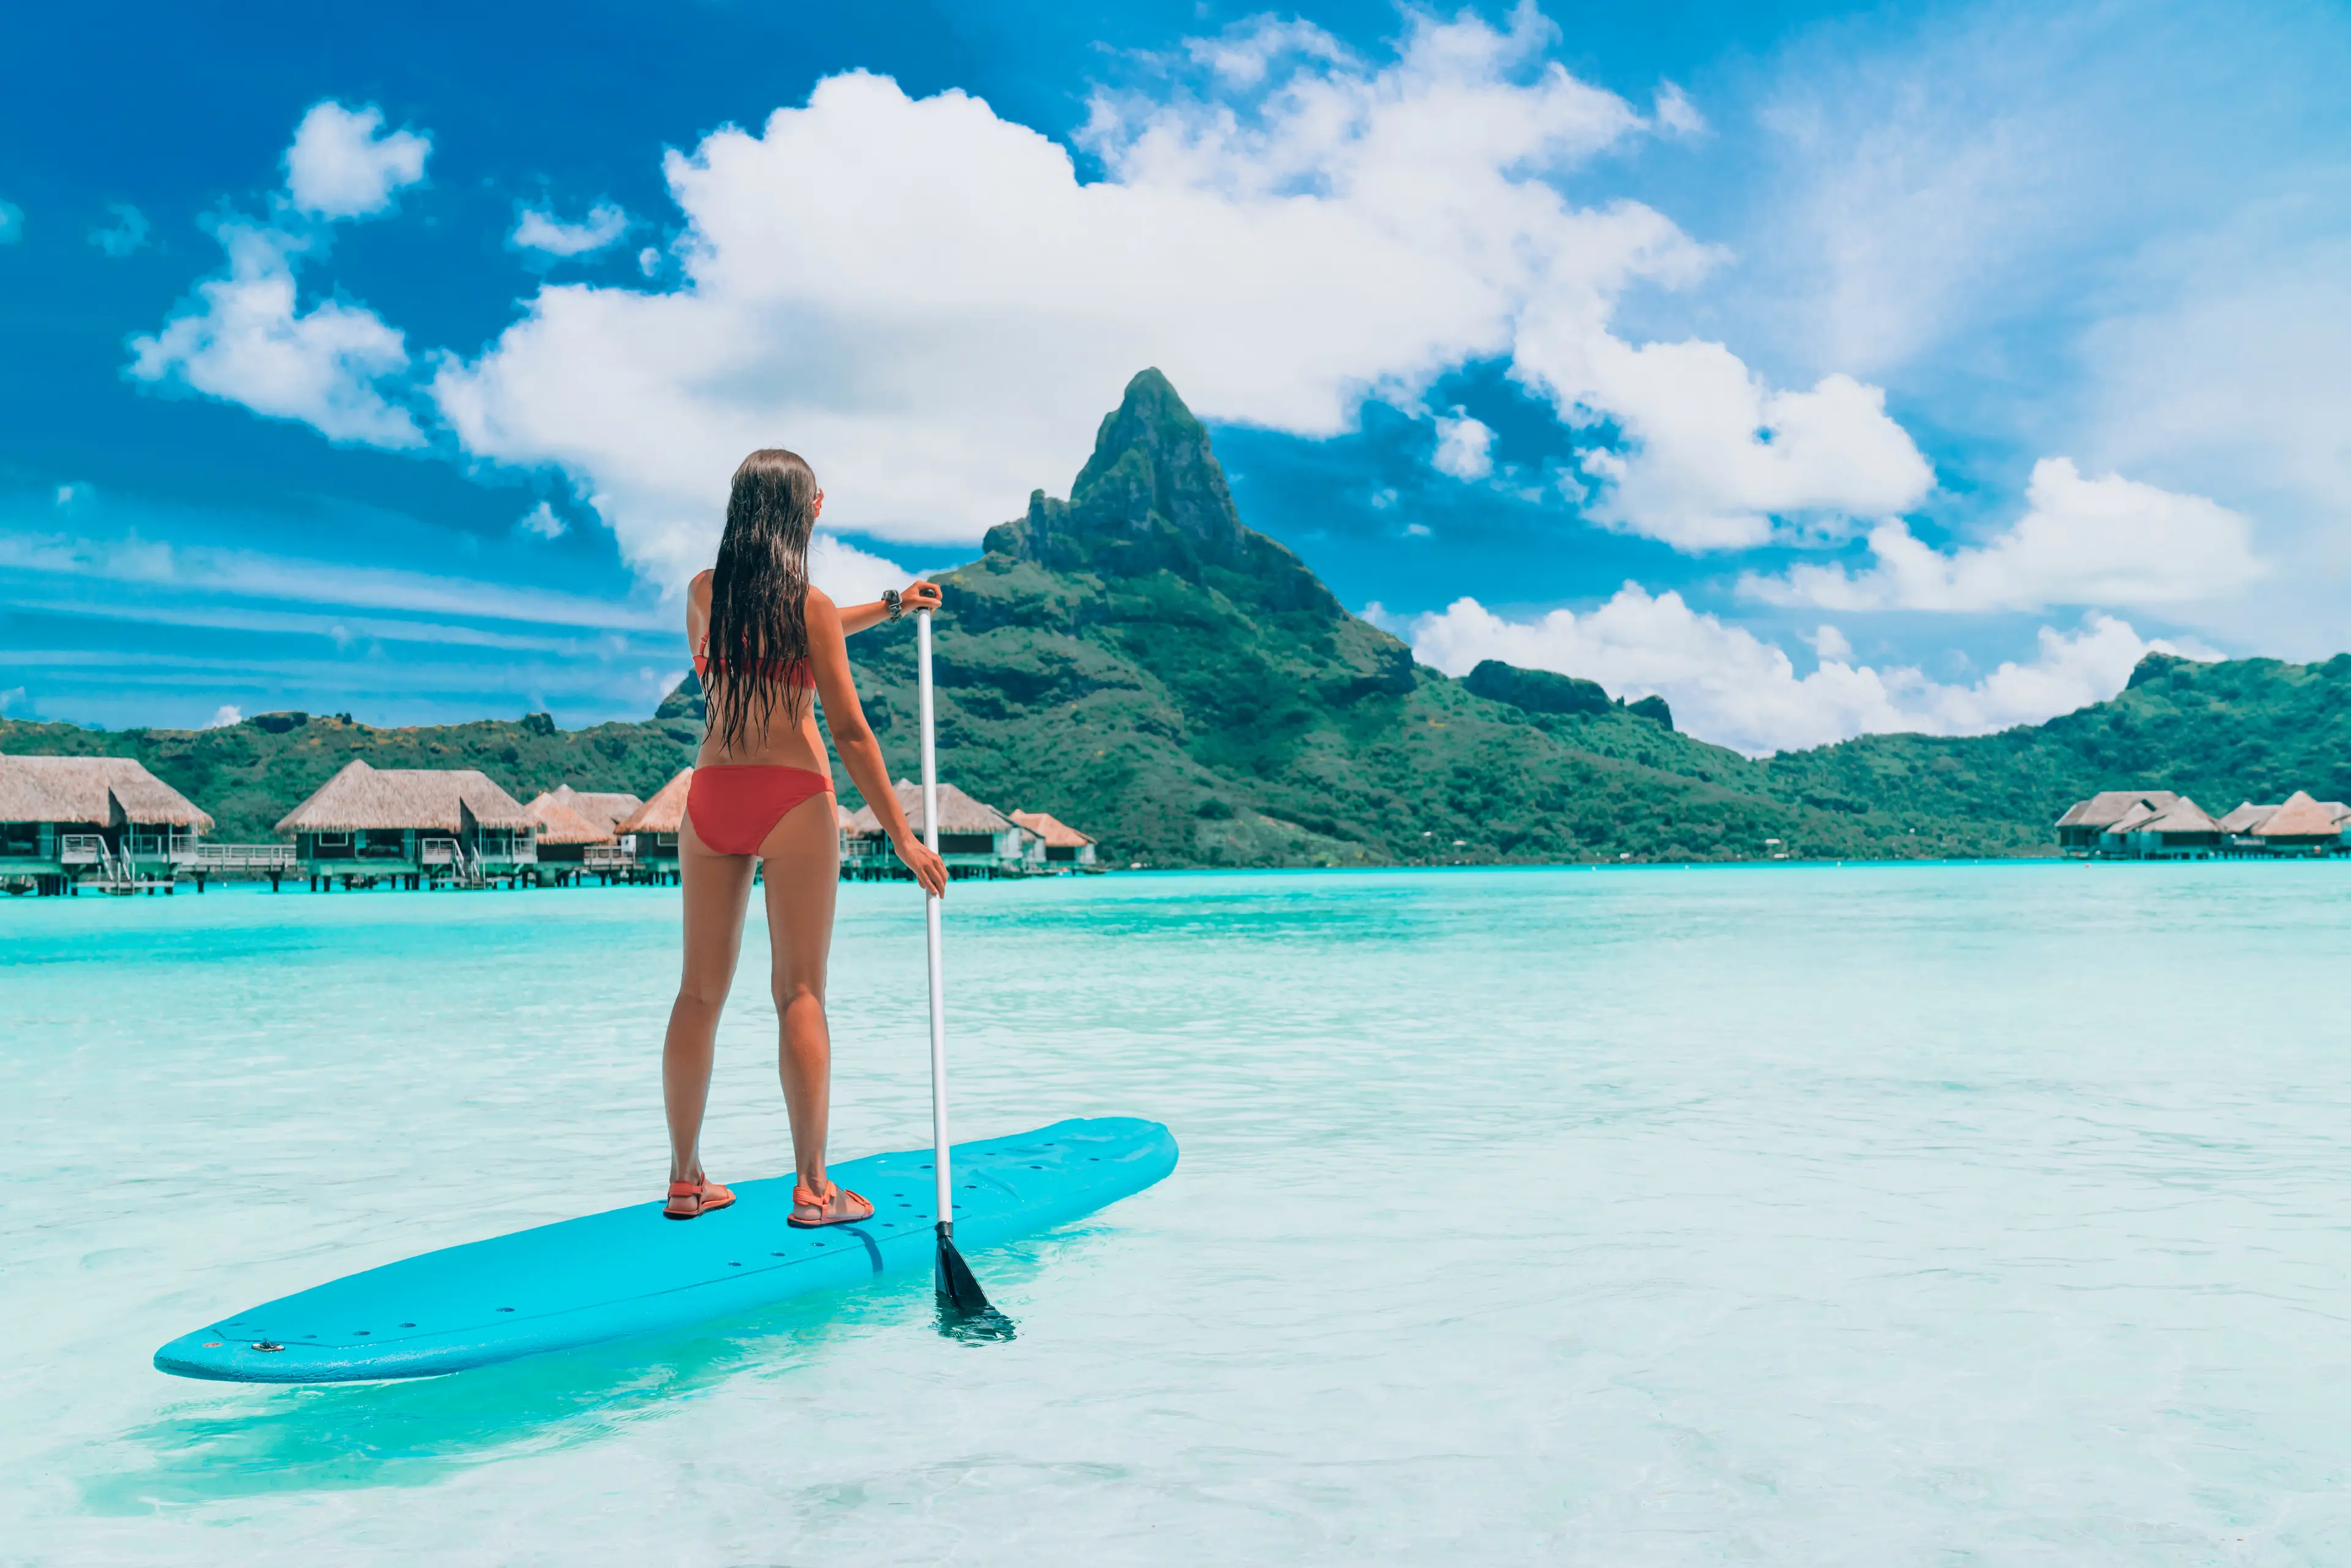 Paddleboarding in the Lagoon